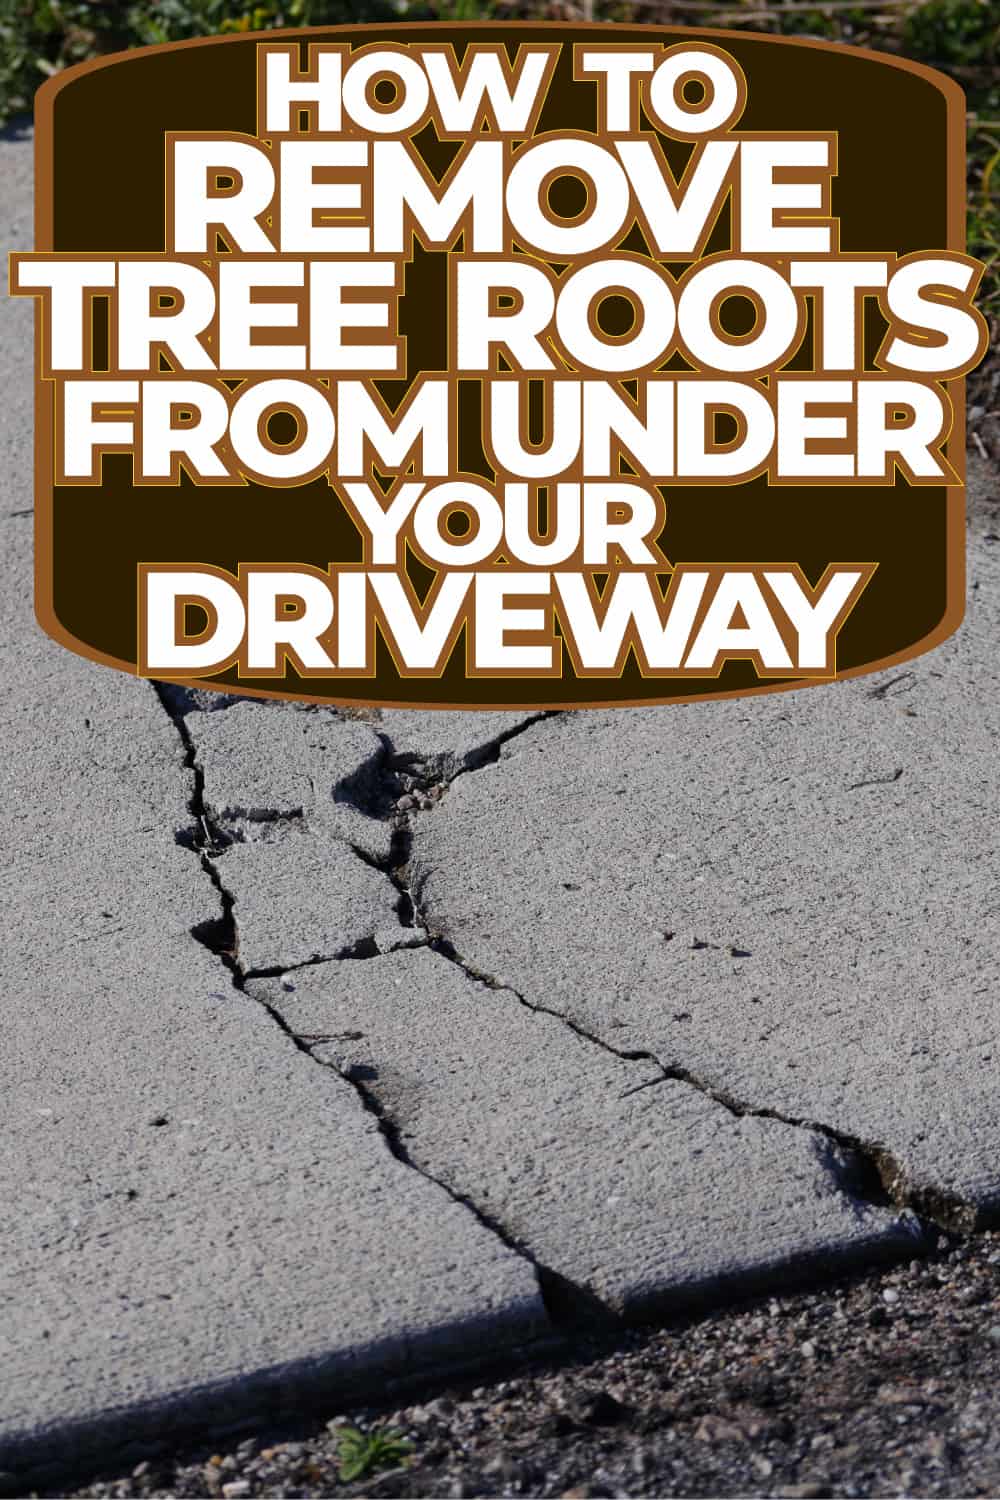 How To Remove Tree Roots From Under Your Driveway